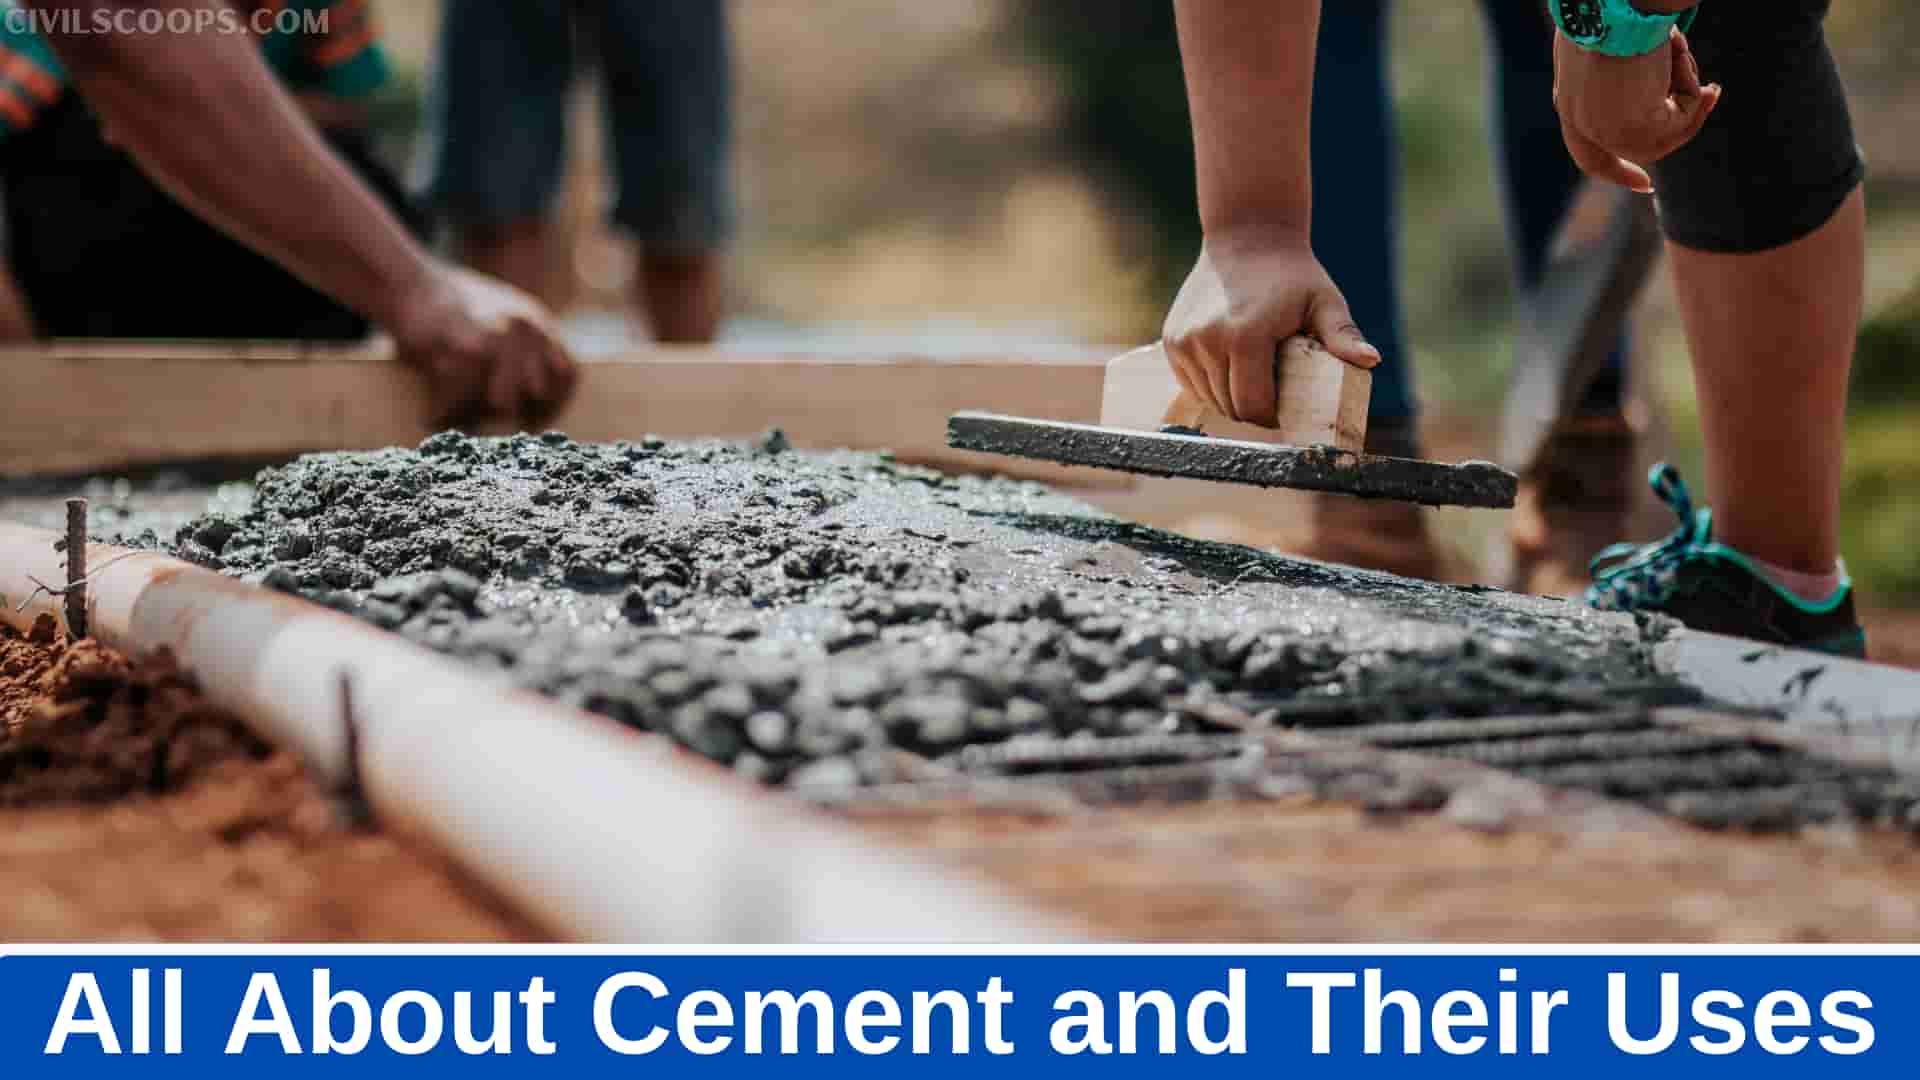 All About Cement and Their Uses